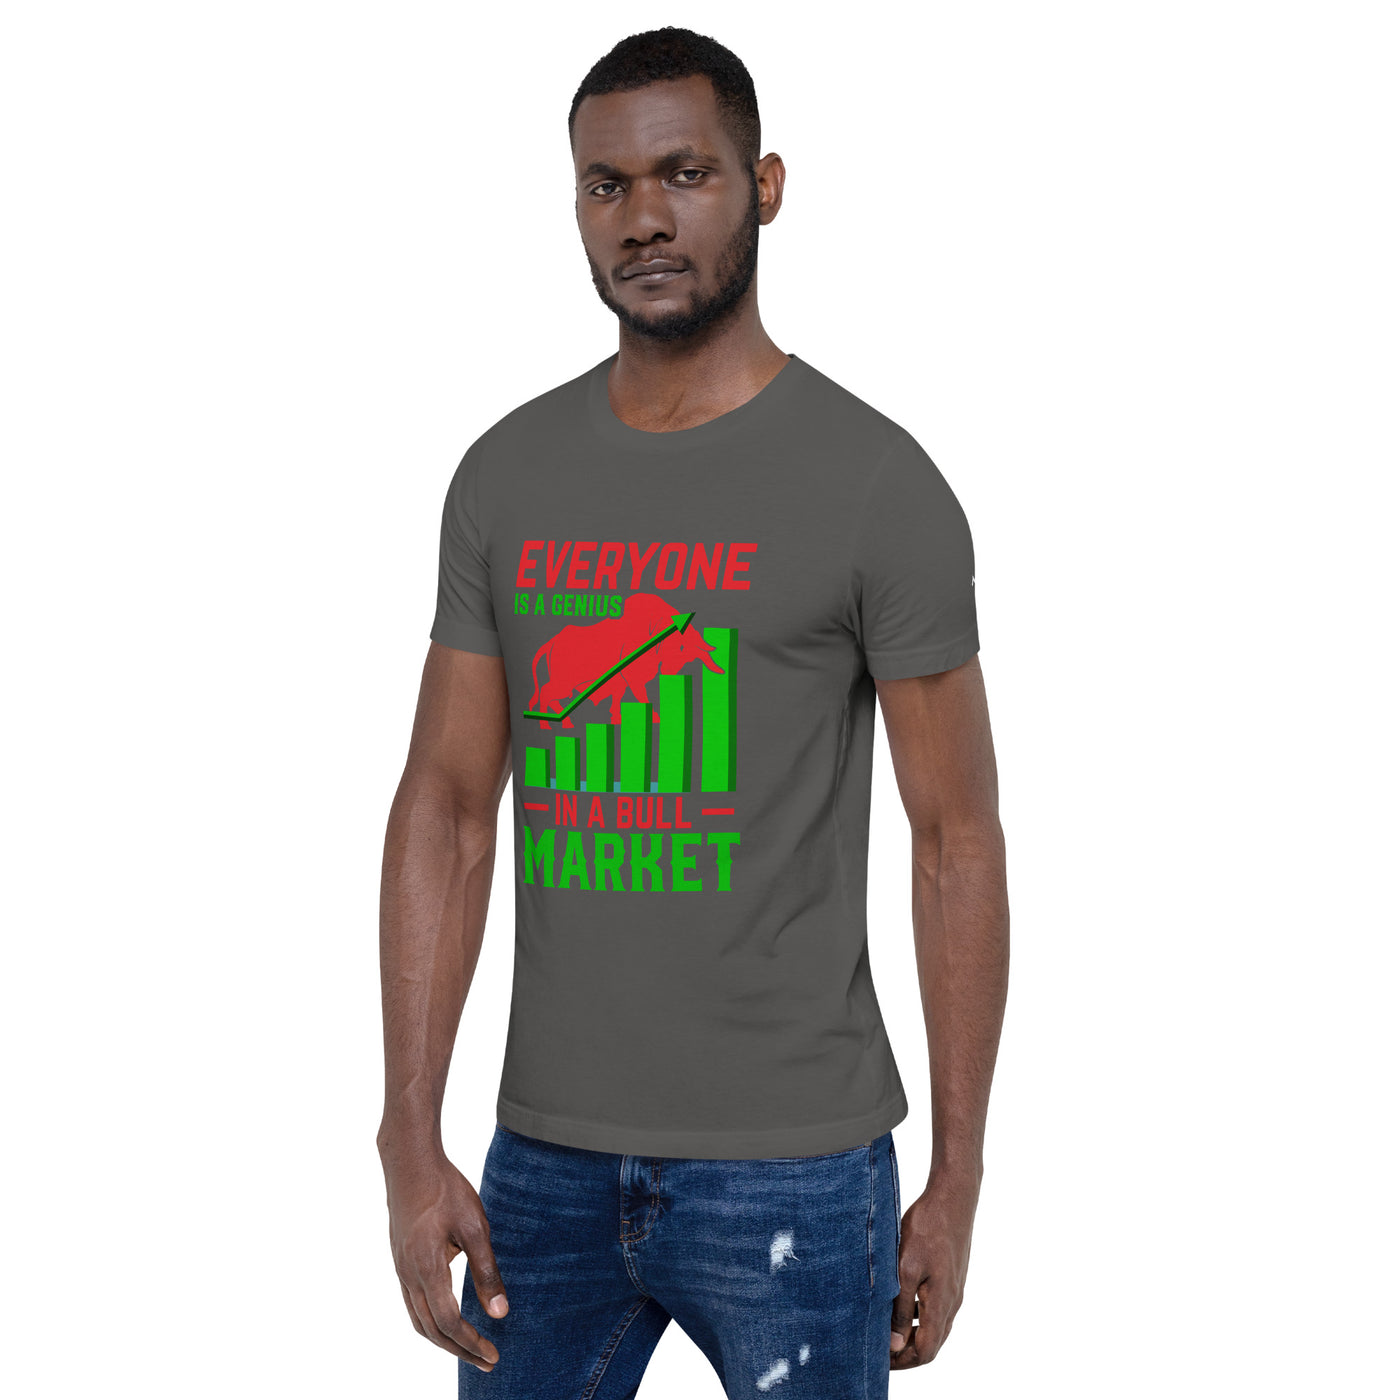 Everyone is a Genius in a Bull Market V1 - T-Shirt